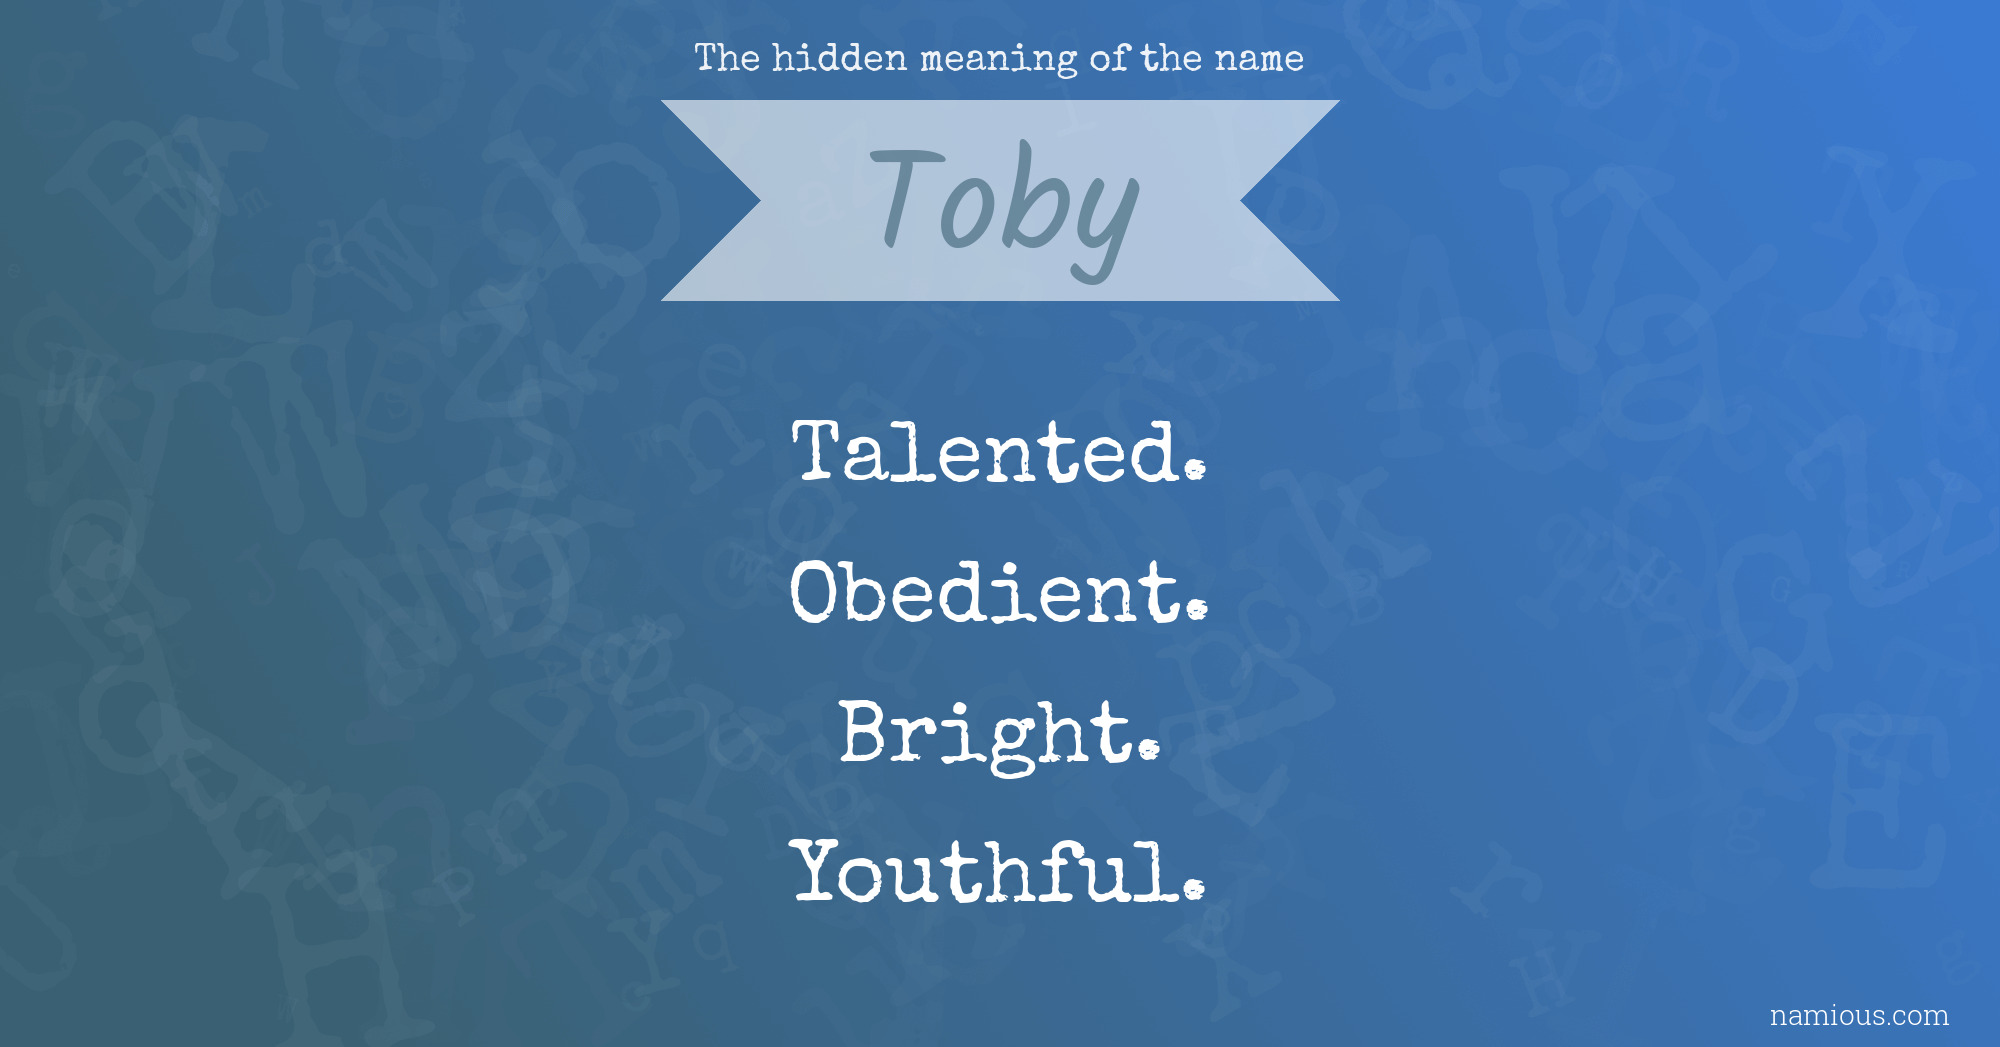 The hidden meaning of the name Toby